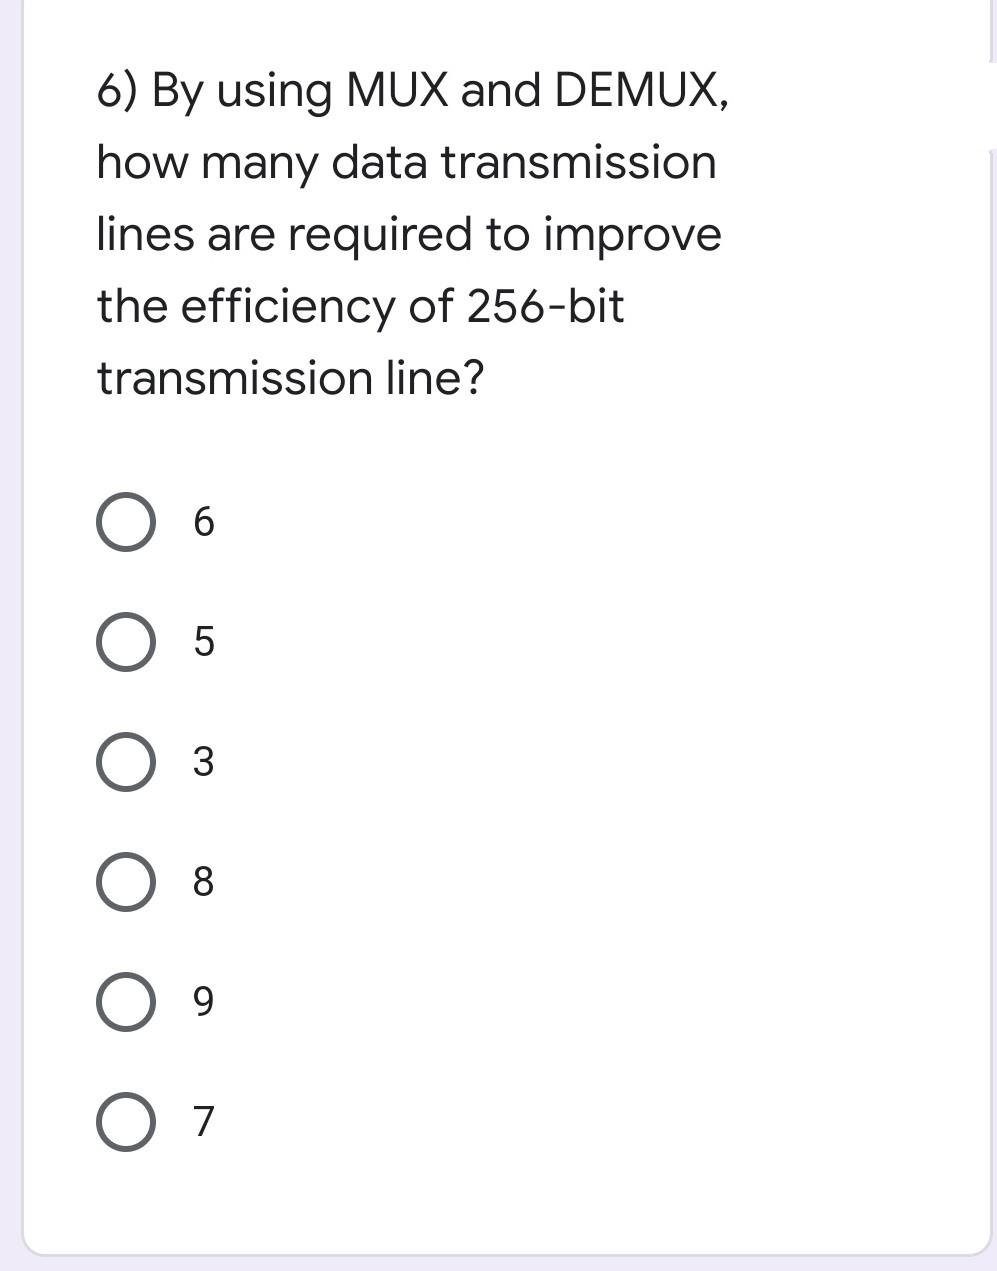 6) By using MUX and DEMUX,
how many data transmission
lines are required to improve
the efficiency of 256-bit
transmission line?
6.
8
9.
7
